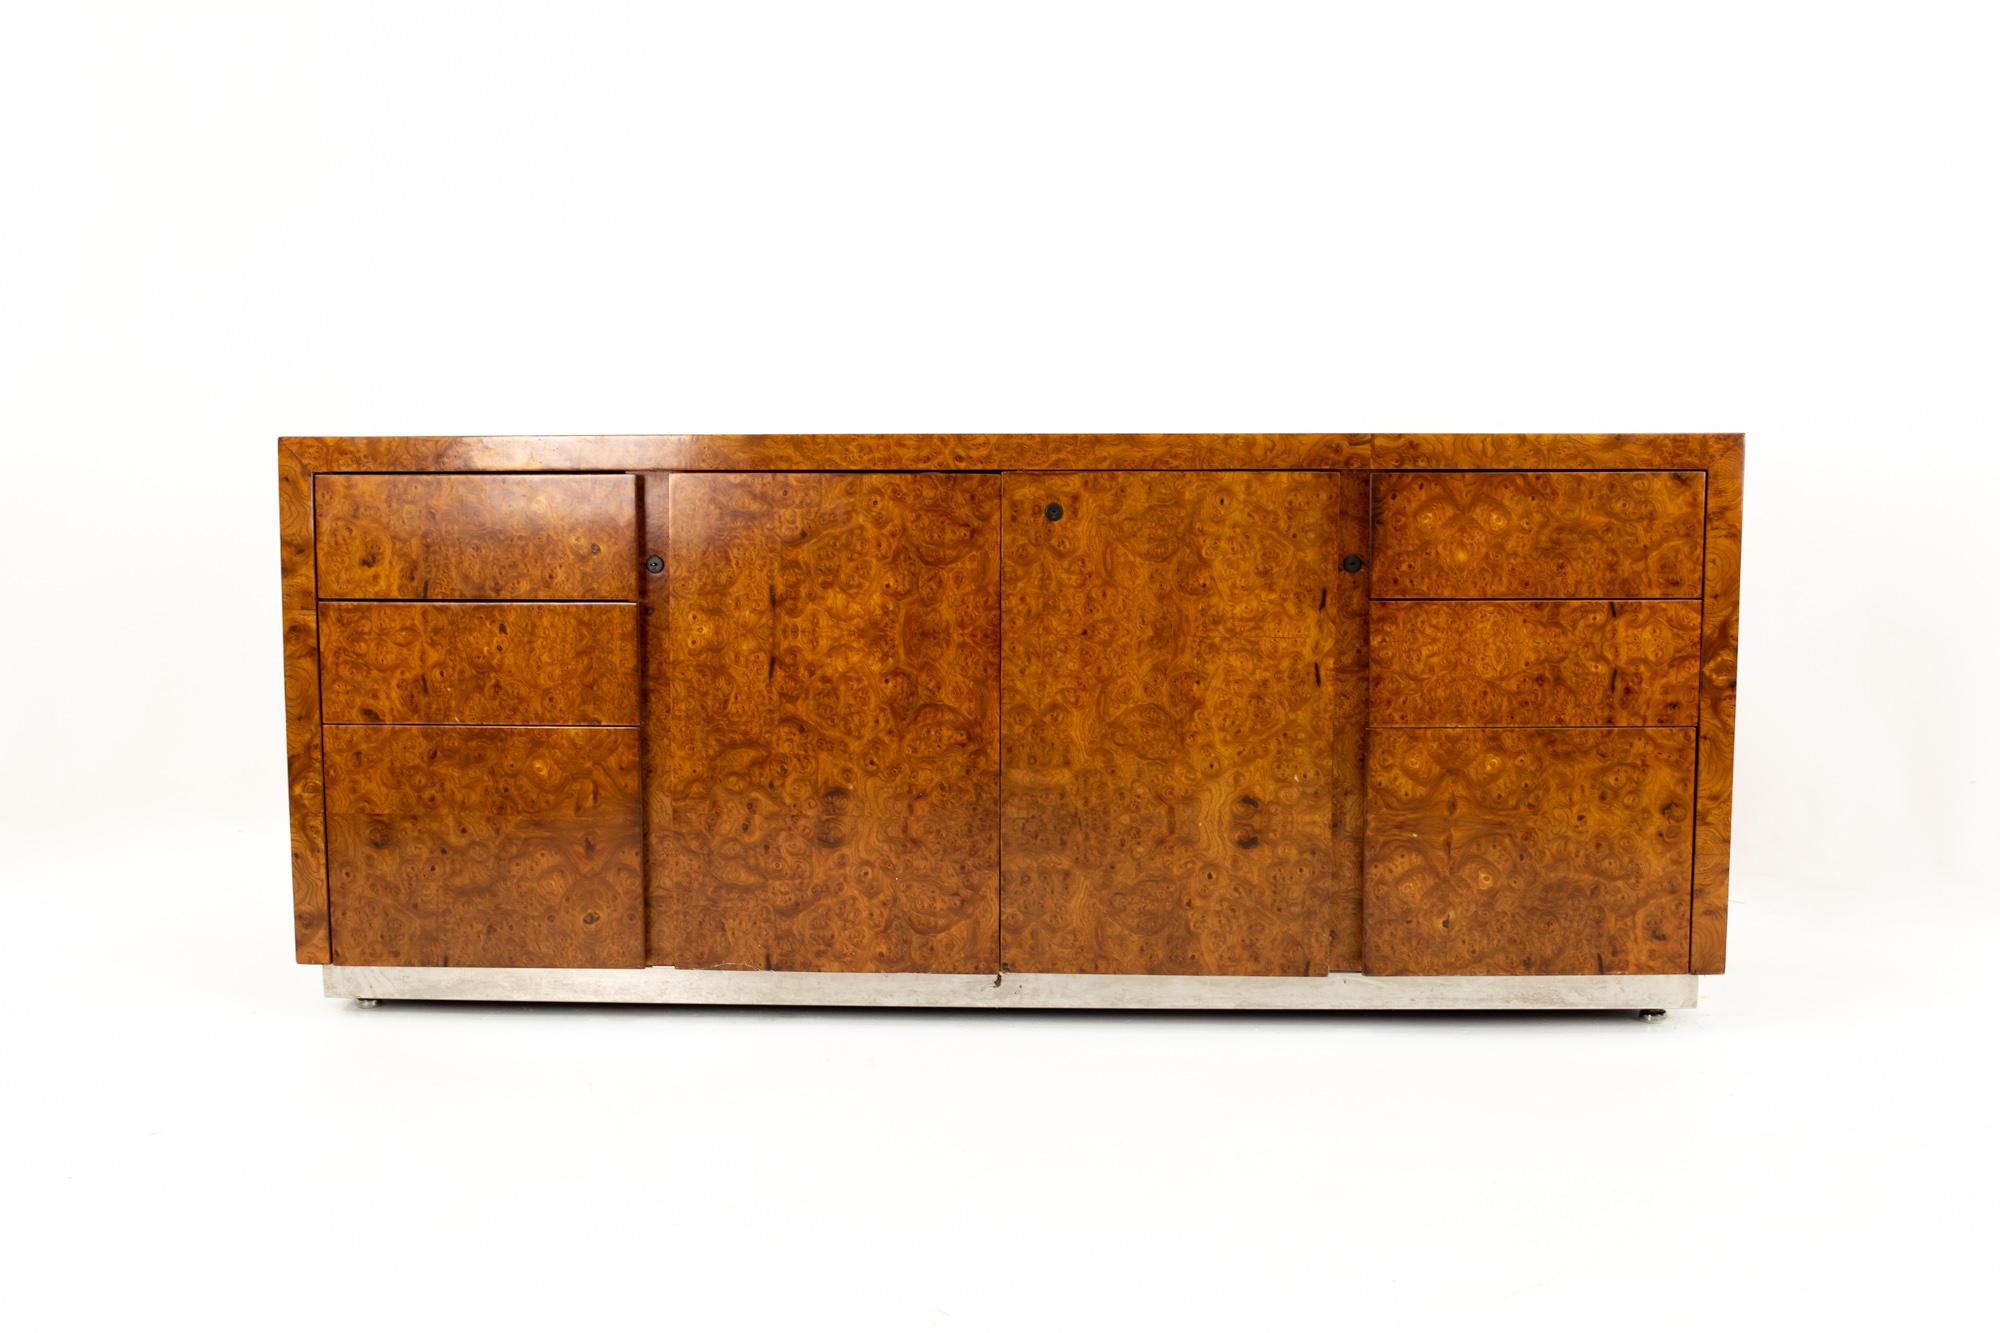 Milo Baughman style Helikon midcentury burl wood sideboard credenza
Credenza measures: 72 wide x 19 deep x 27 high

All pieces of furniture can be had in what we call restored vintage condition. That means the piece is restored upon purchase so